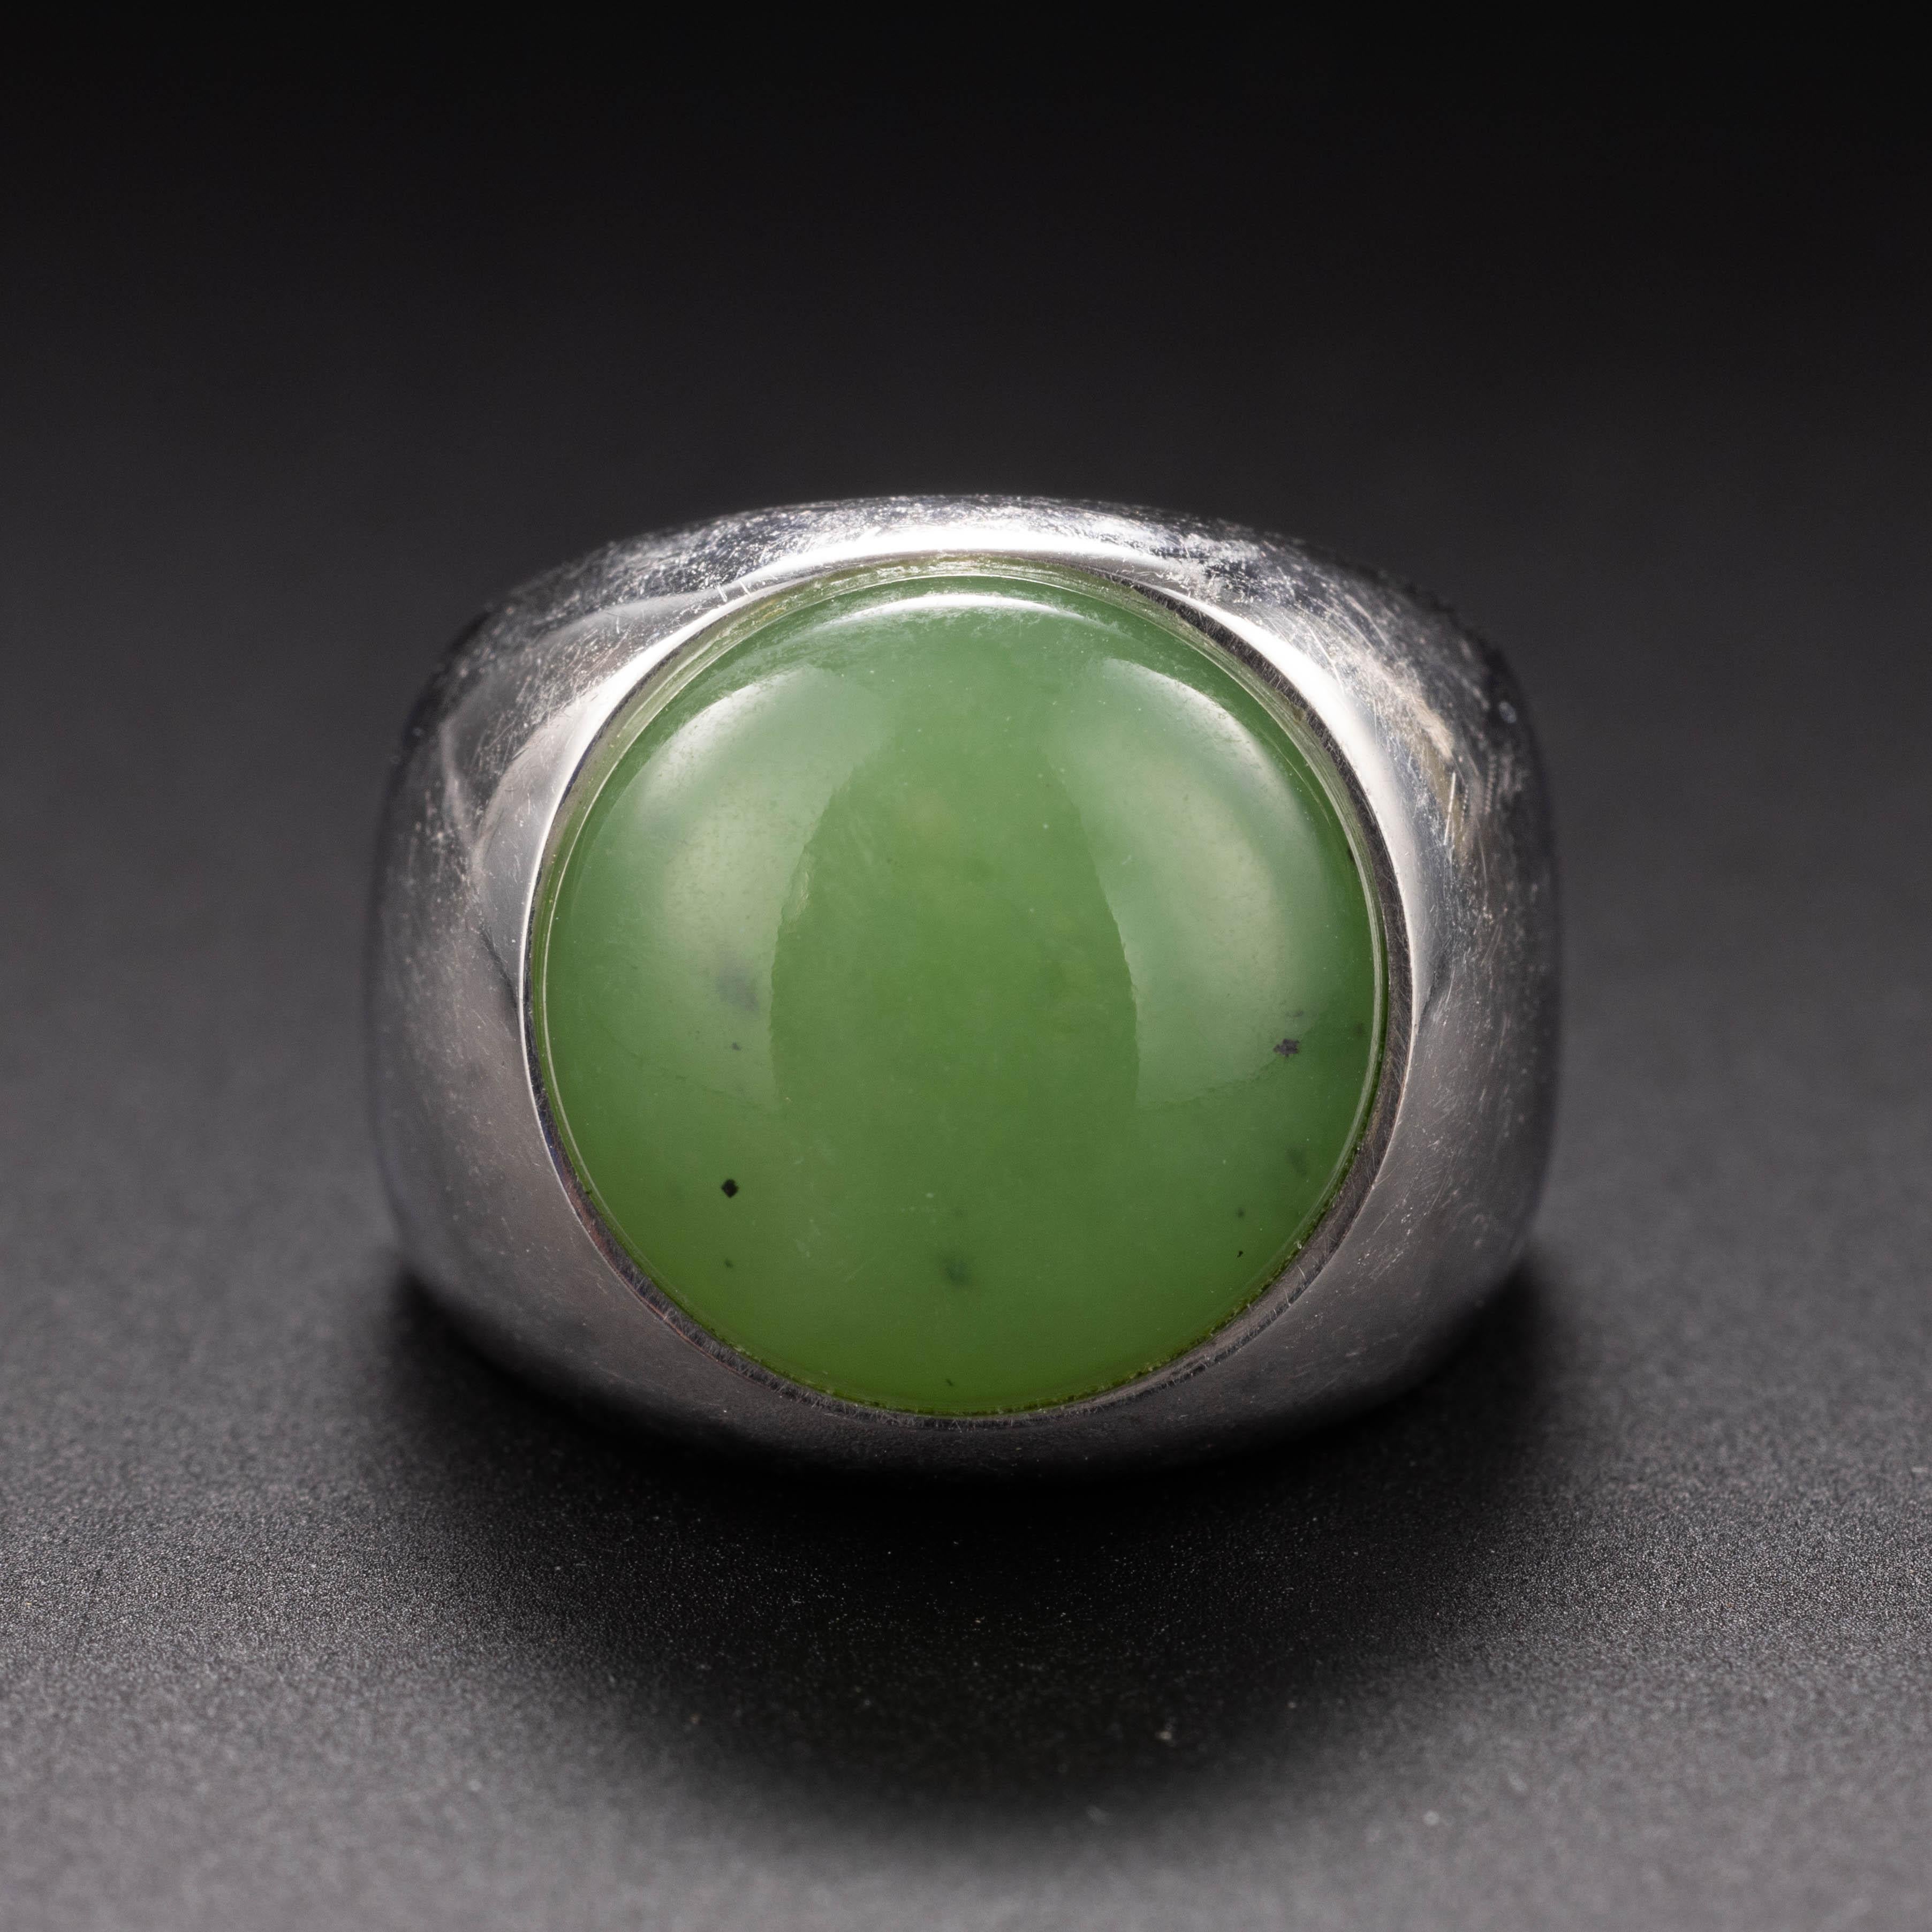 Hand-crafted in gleaming white 18K gold, this sleek, dense ring features a round cabochon of something quite special: natural, untreated Siberian jade. The round cabochon is highly translucent and the most vivid apple green. 

Bezel-set within a